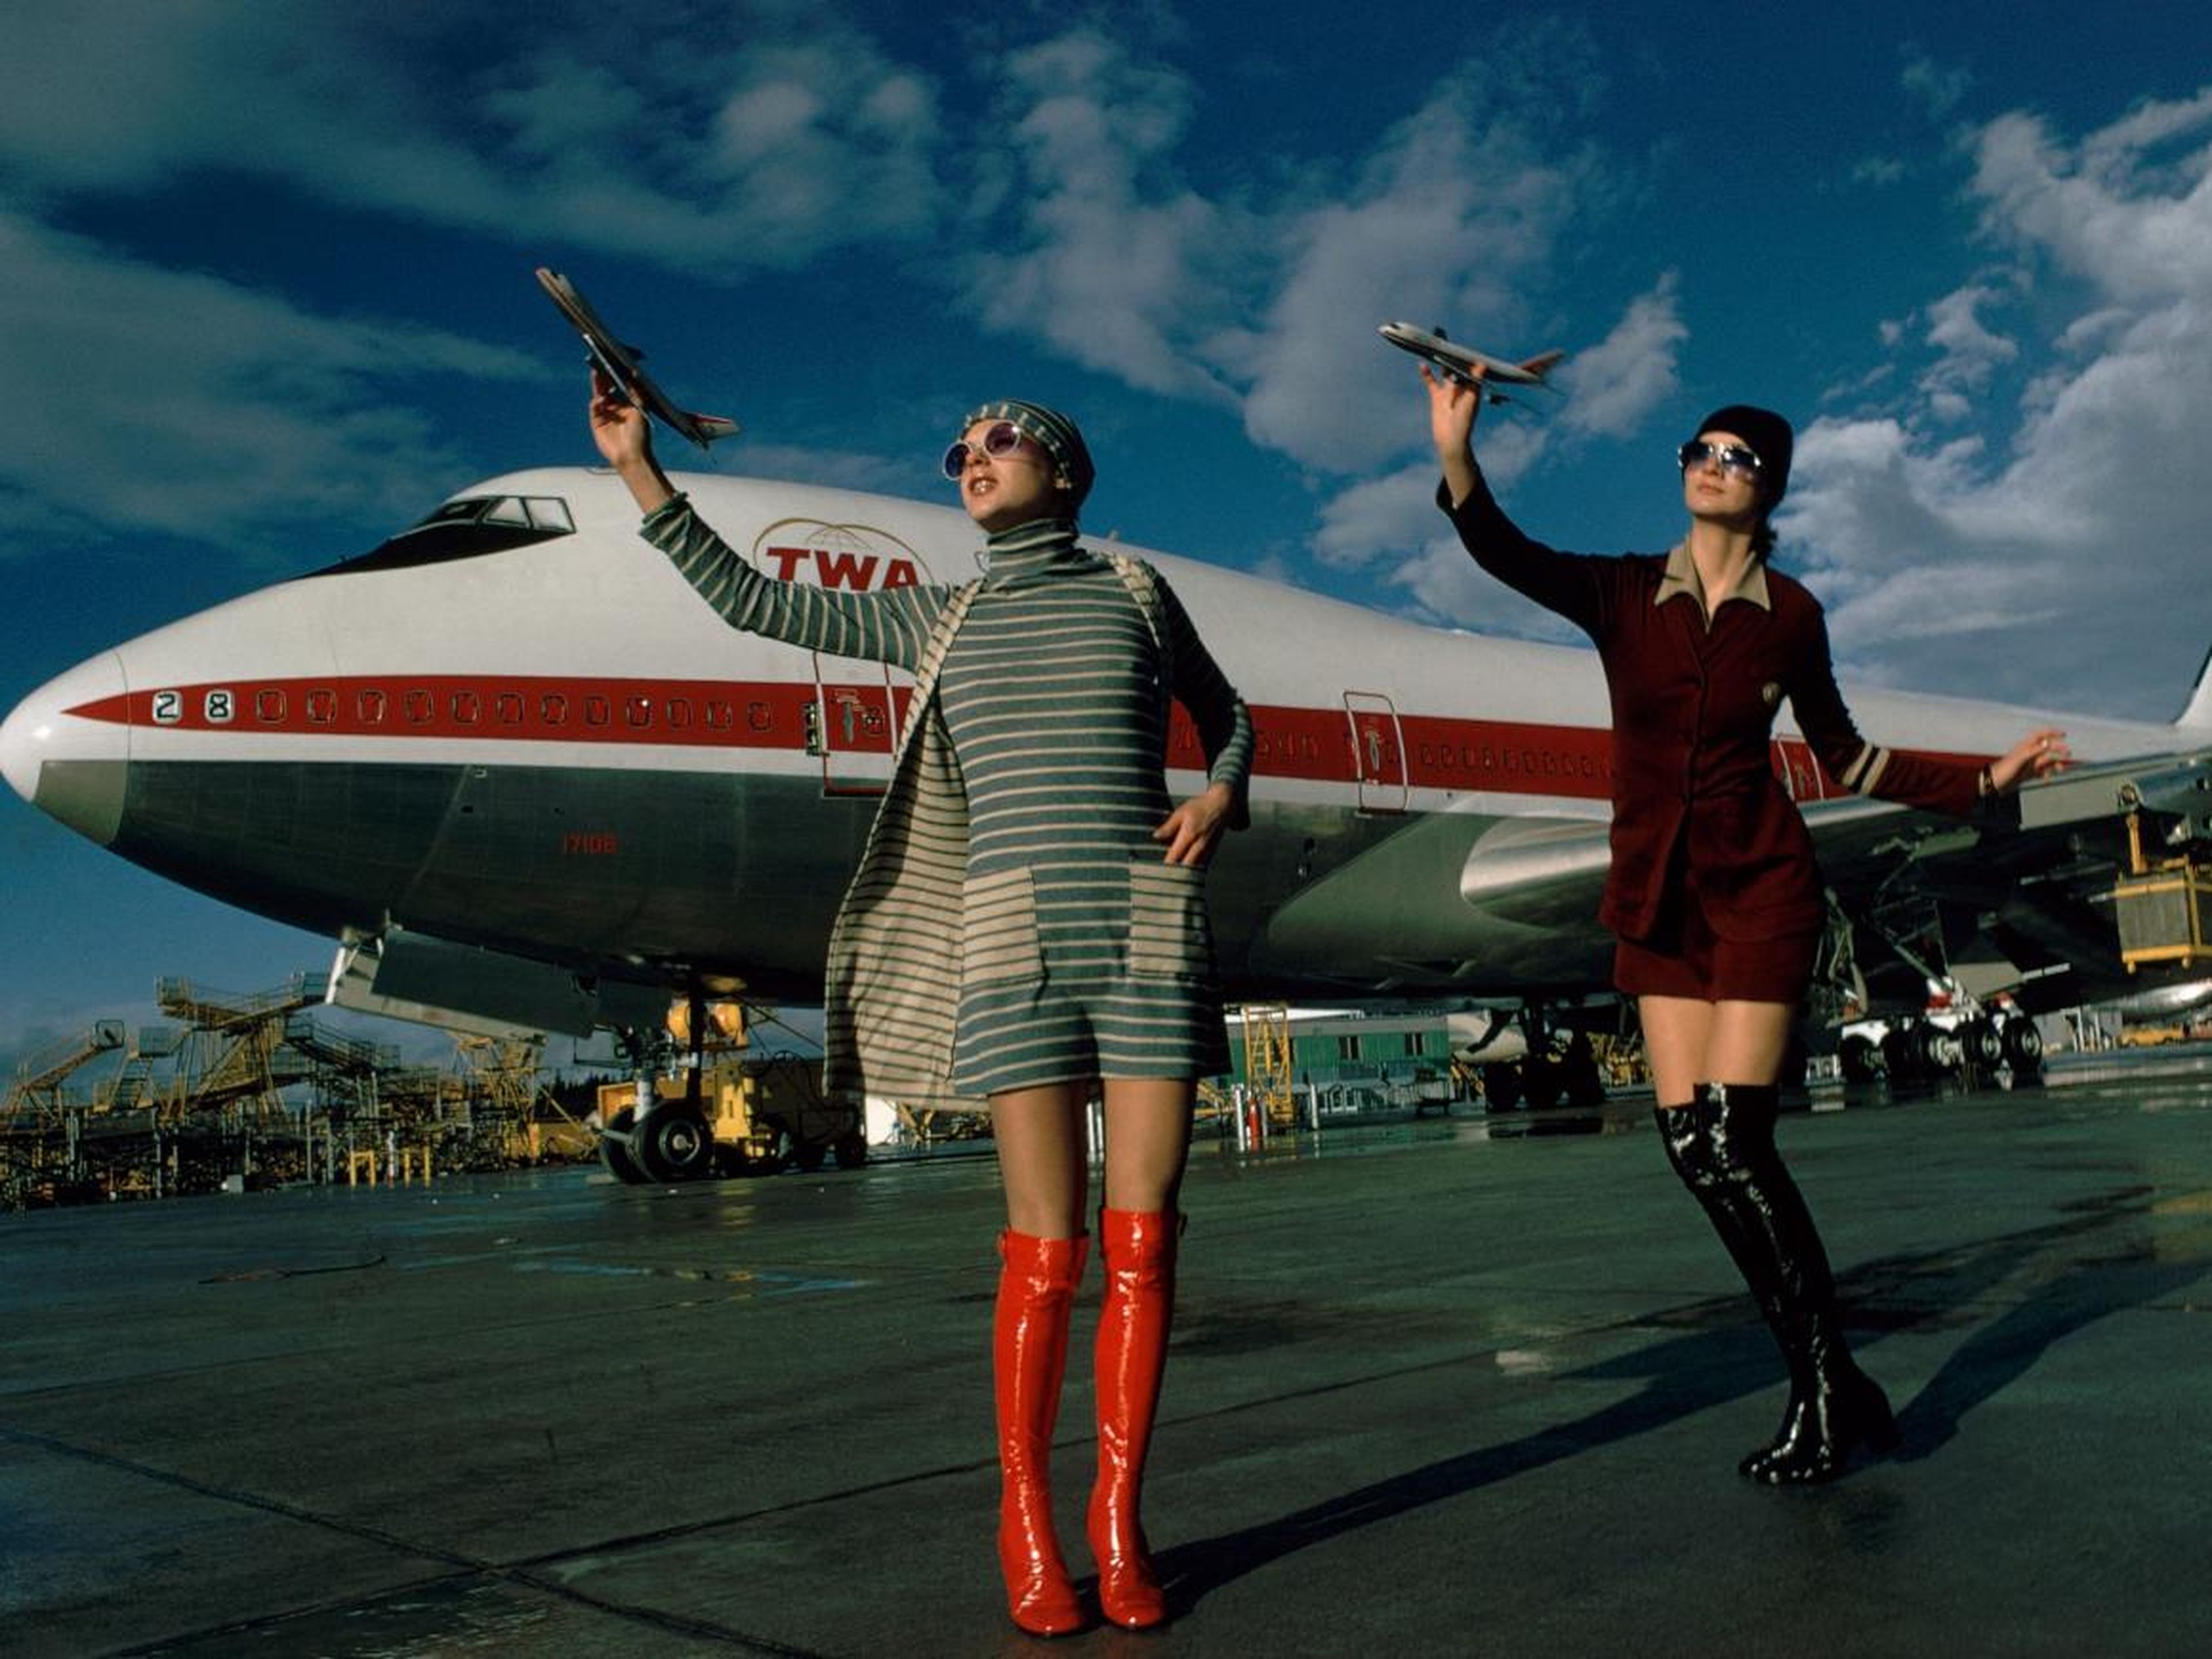 Models pose in front of a TWA Boeing 747 jumbo jet.